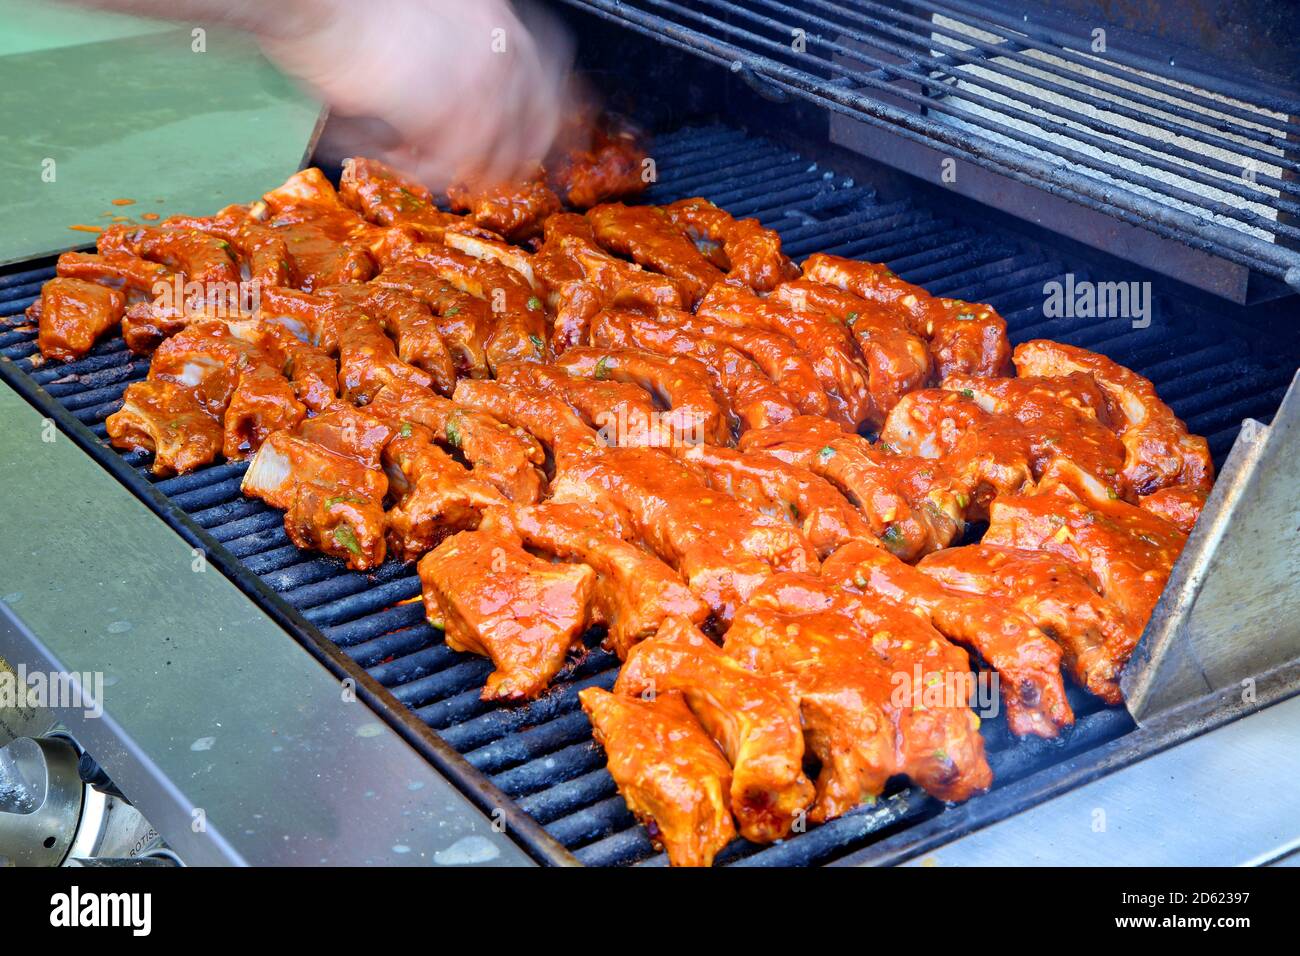 BBQ Pork Ribs Cooking on Grill Stock Photo